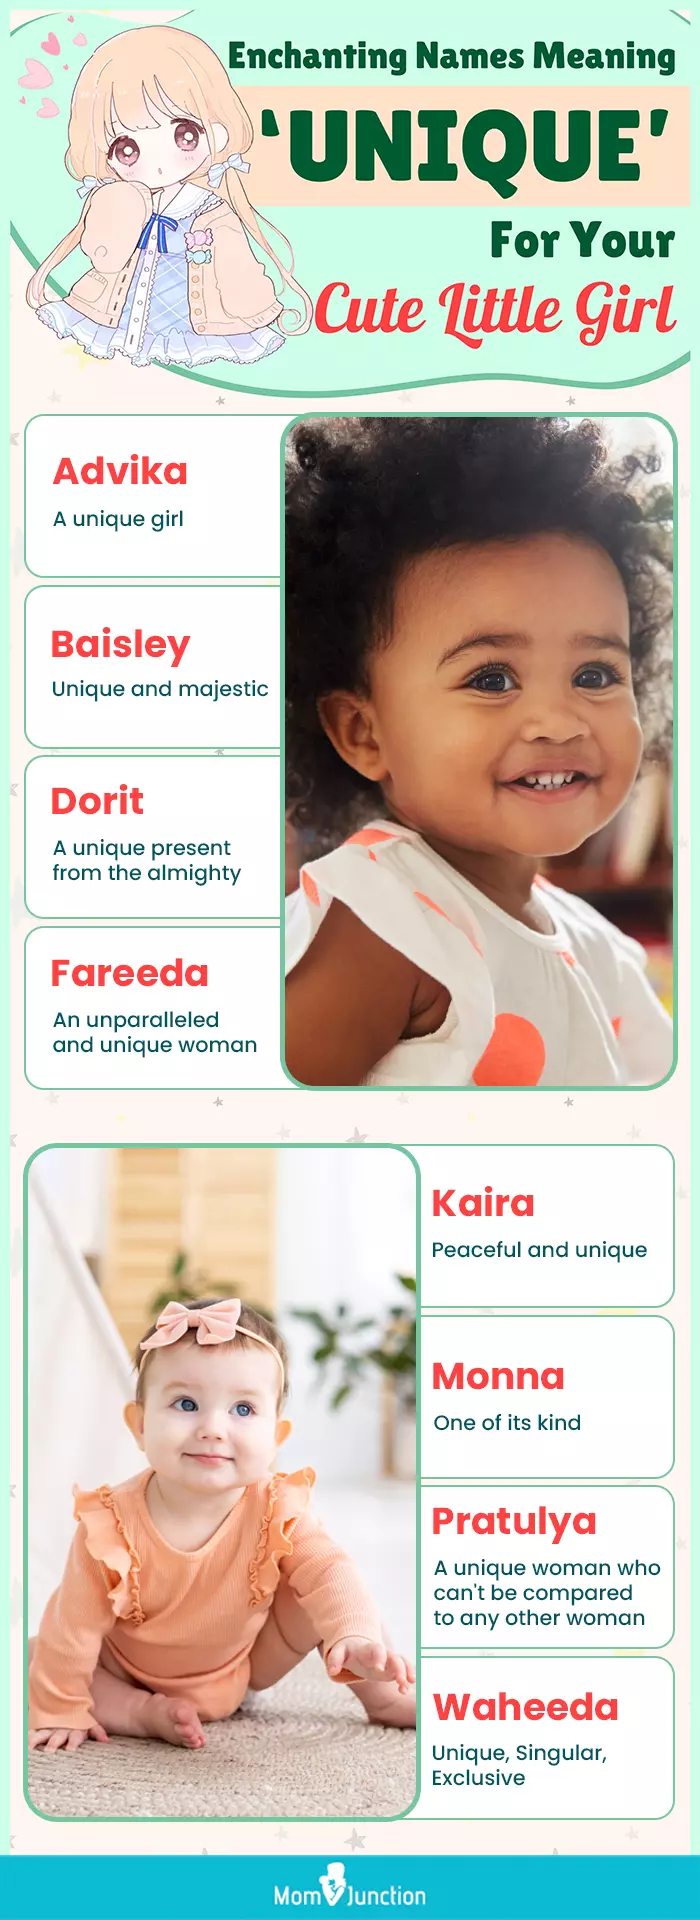 enchanting names meaning unique for your cute little girl (infographic)